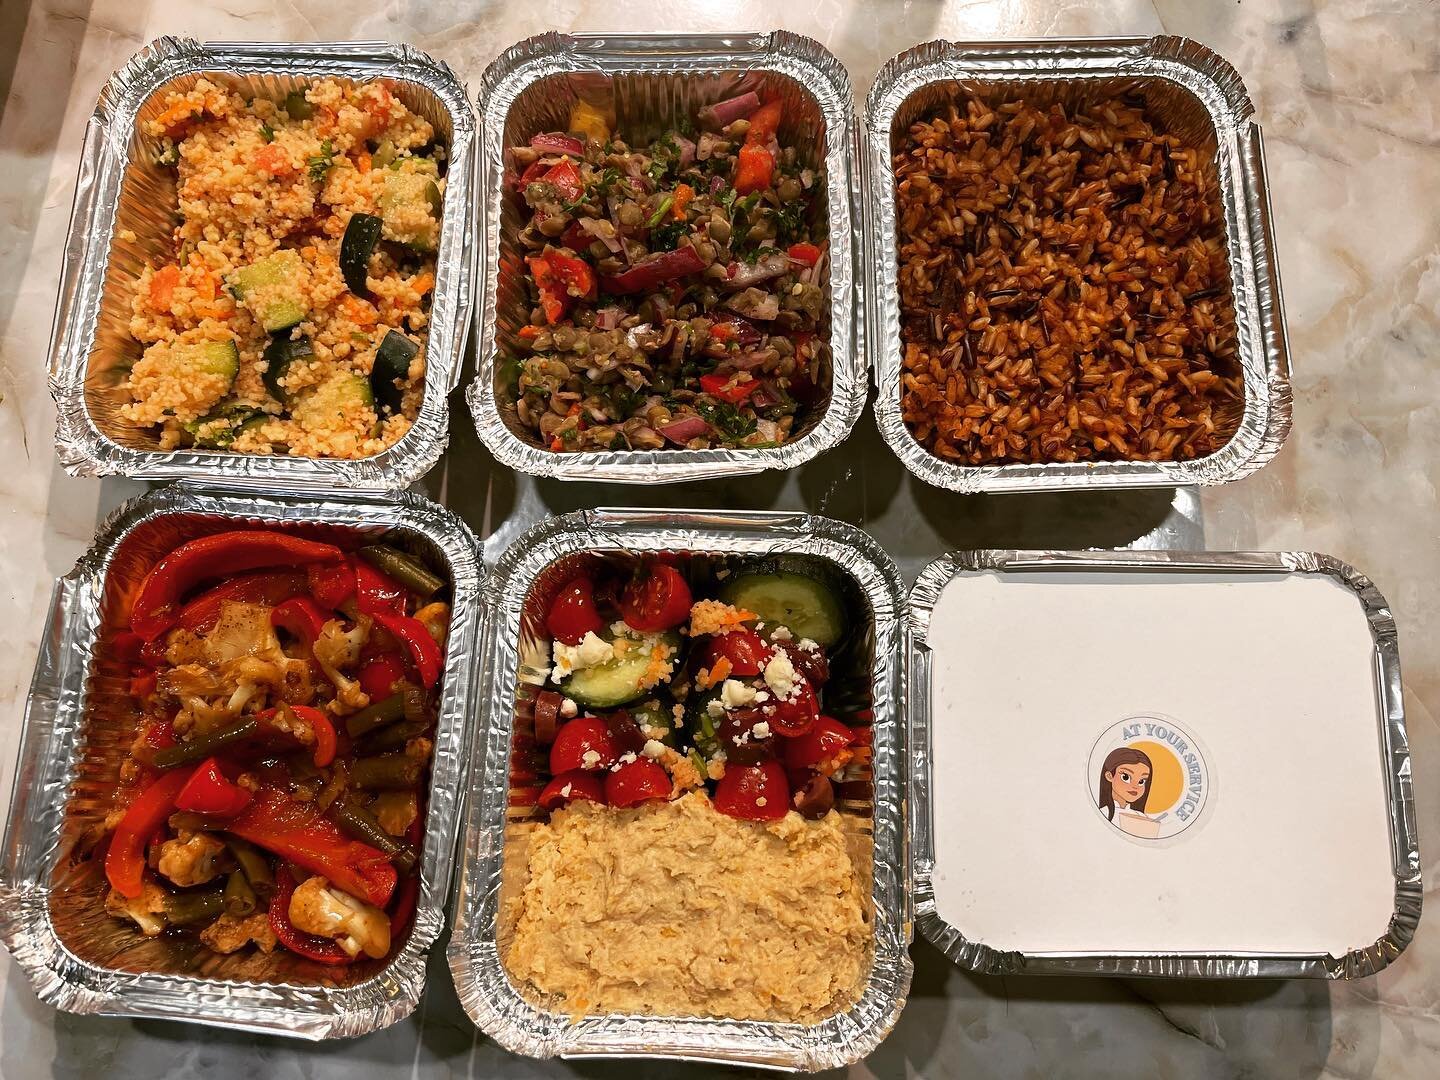 A week of vegan lunches at $8 per meal. Left to right, top to bottom: Tabbouleh Salad, Turkish Lentil Salad, Wild Spicy Spanish Rice, Cauliflower Stir Fry, and a Humus Salad.

#veganfood #smallbusiness #bouldercolorado #bouldersmallbusiness #mealdeli